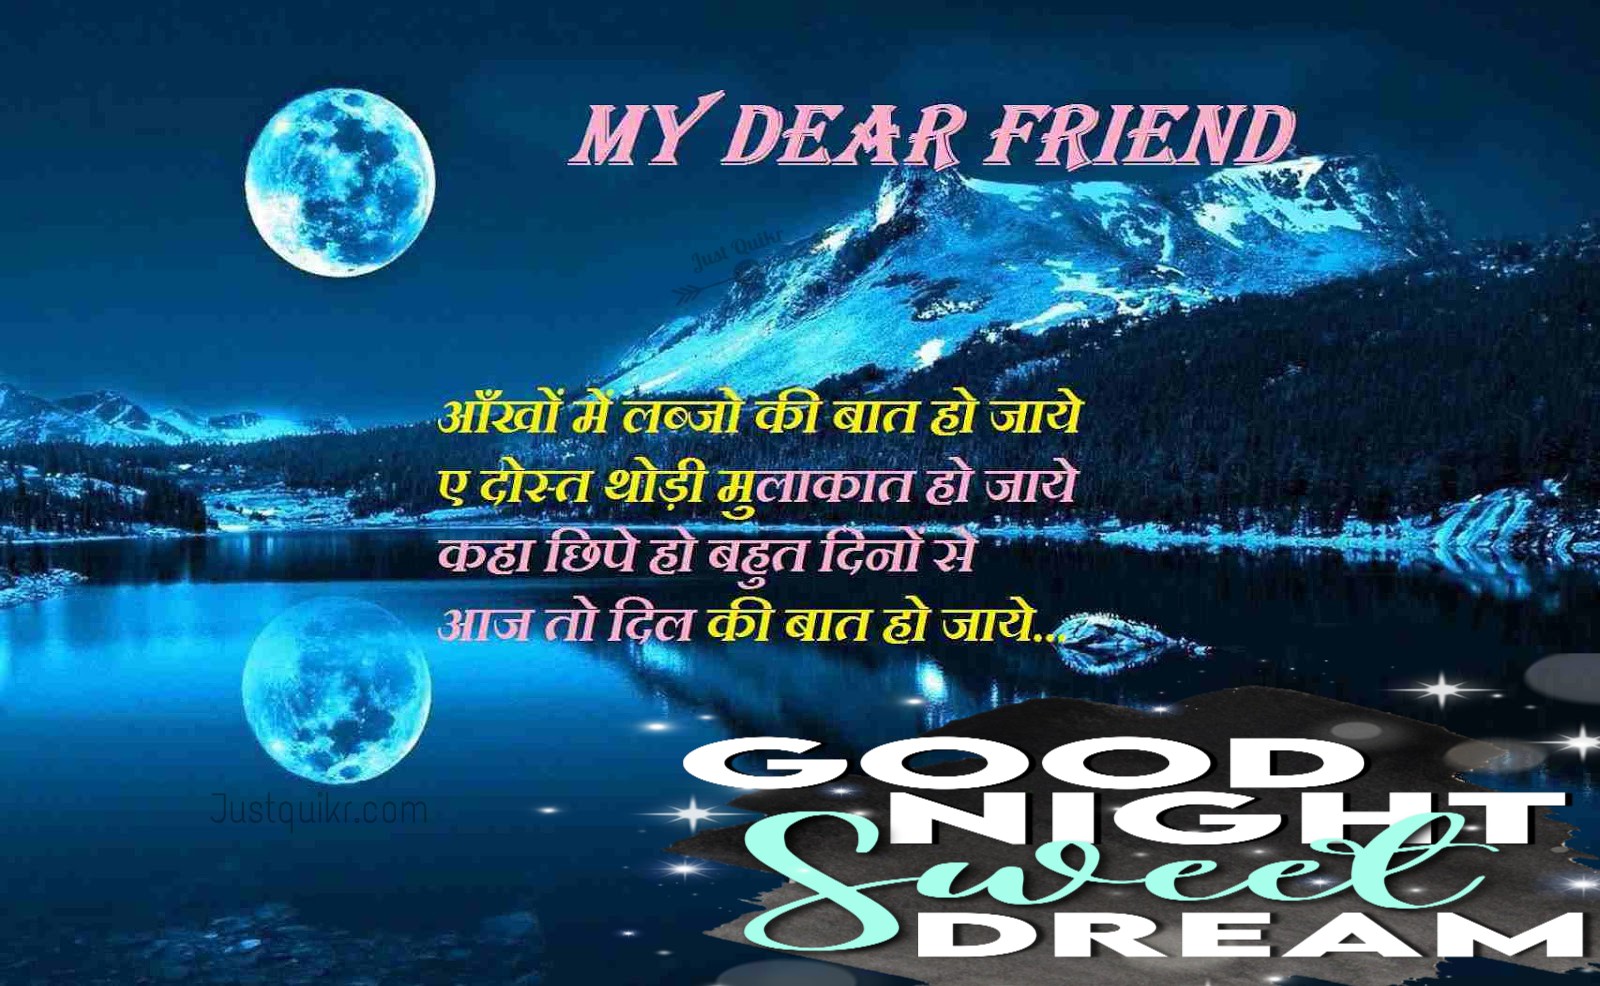 Good Night HD Pics Images For Friend With Quotes in Hindi 